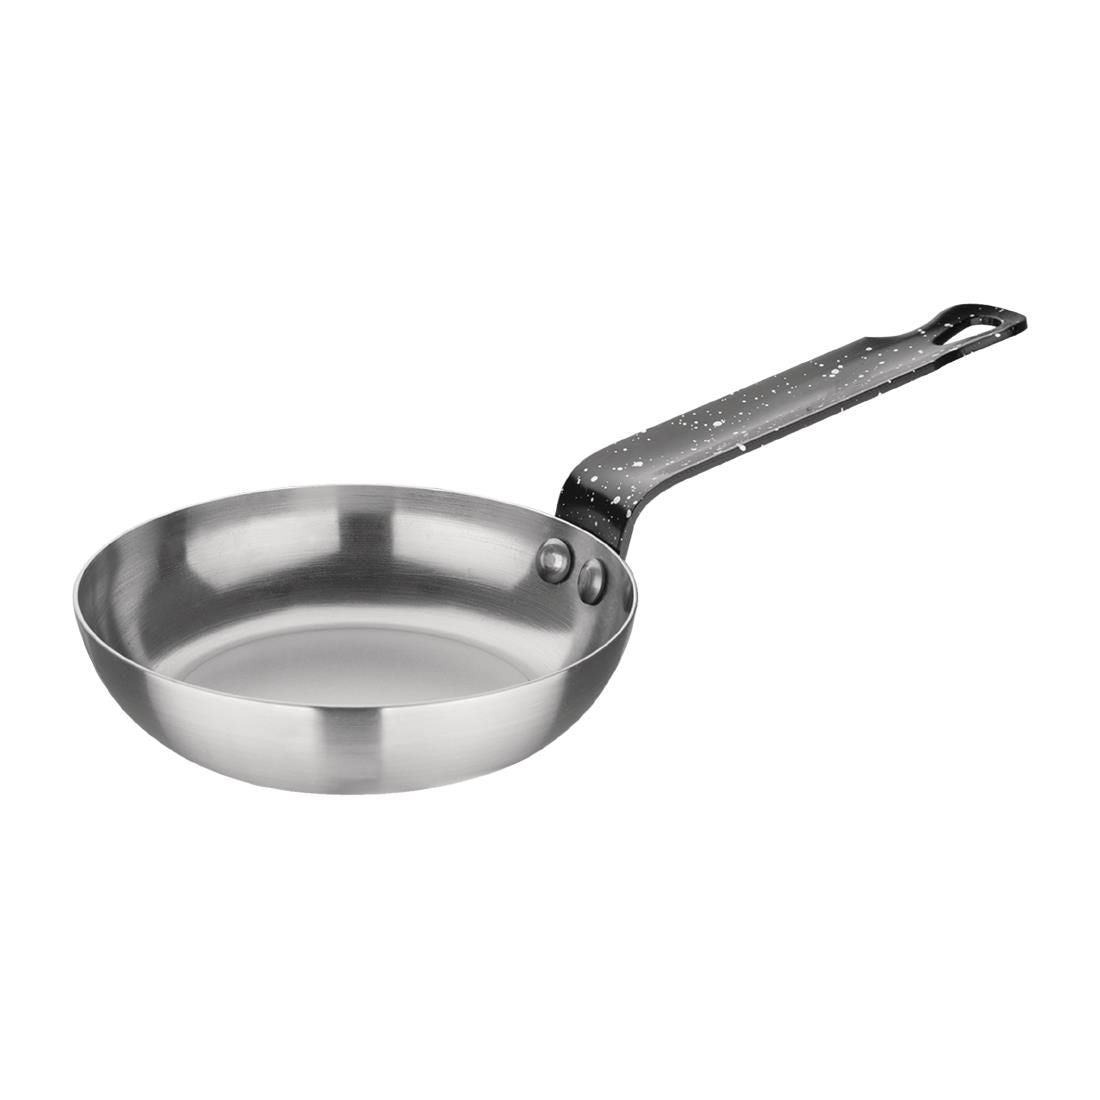 GD065 Vogue Carbon Steel Blini Pan 130mm JD Catering Equipment Solutions Ltd